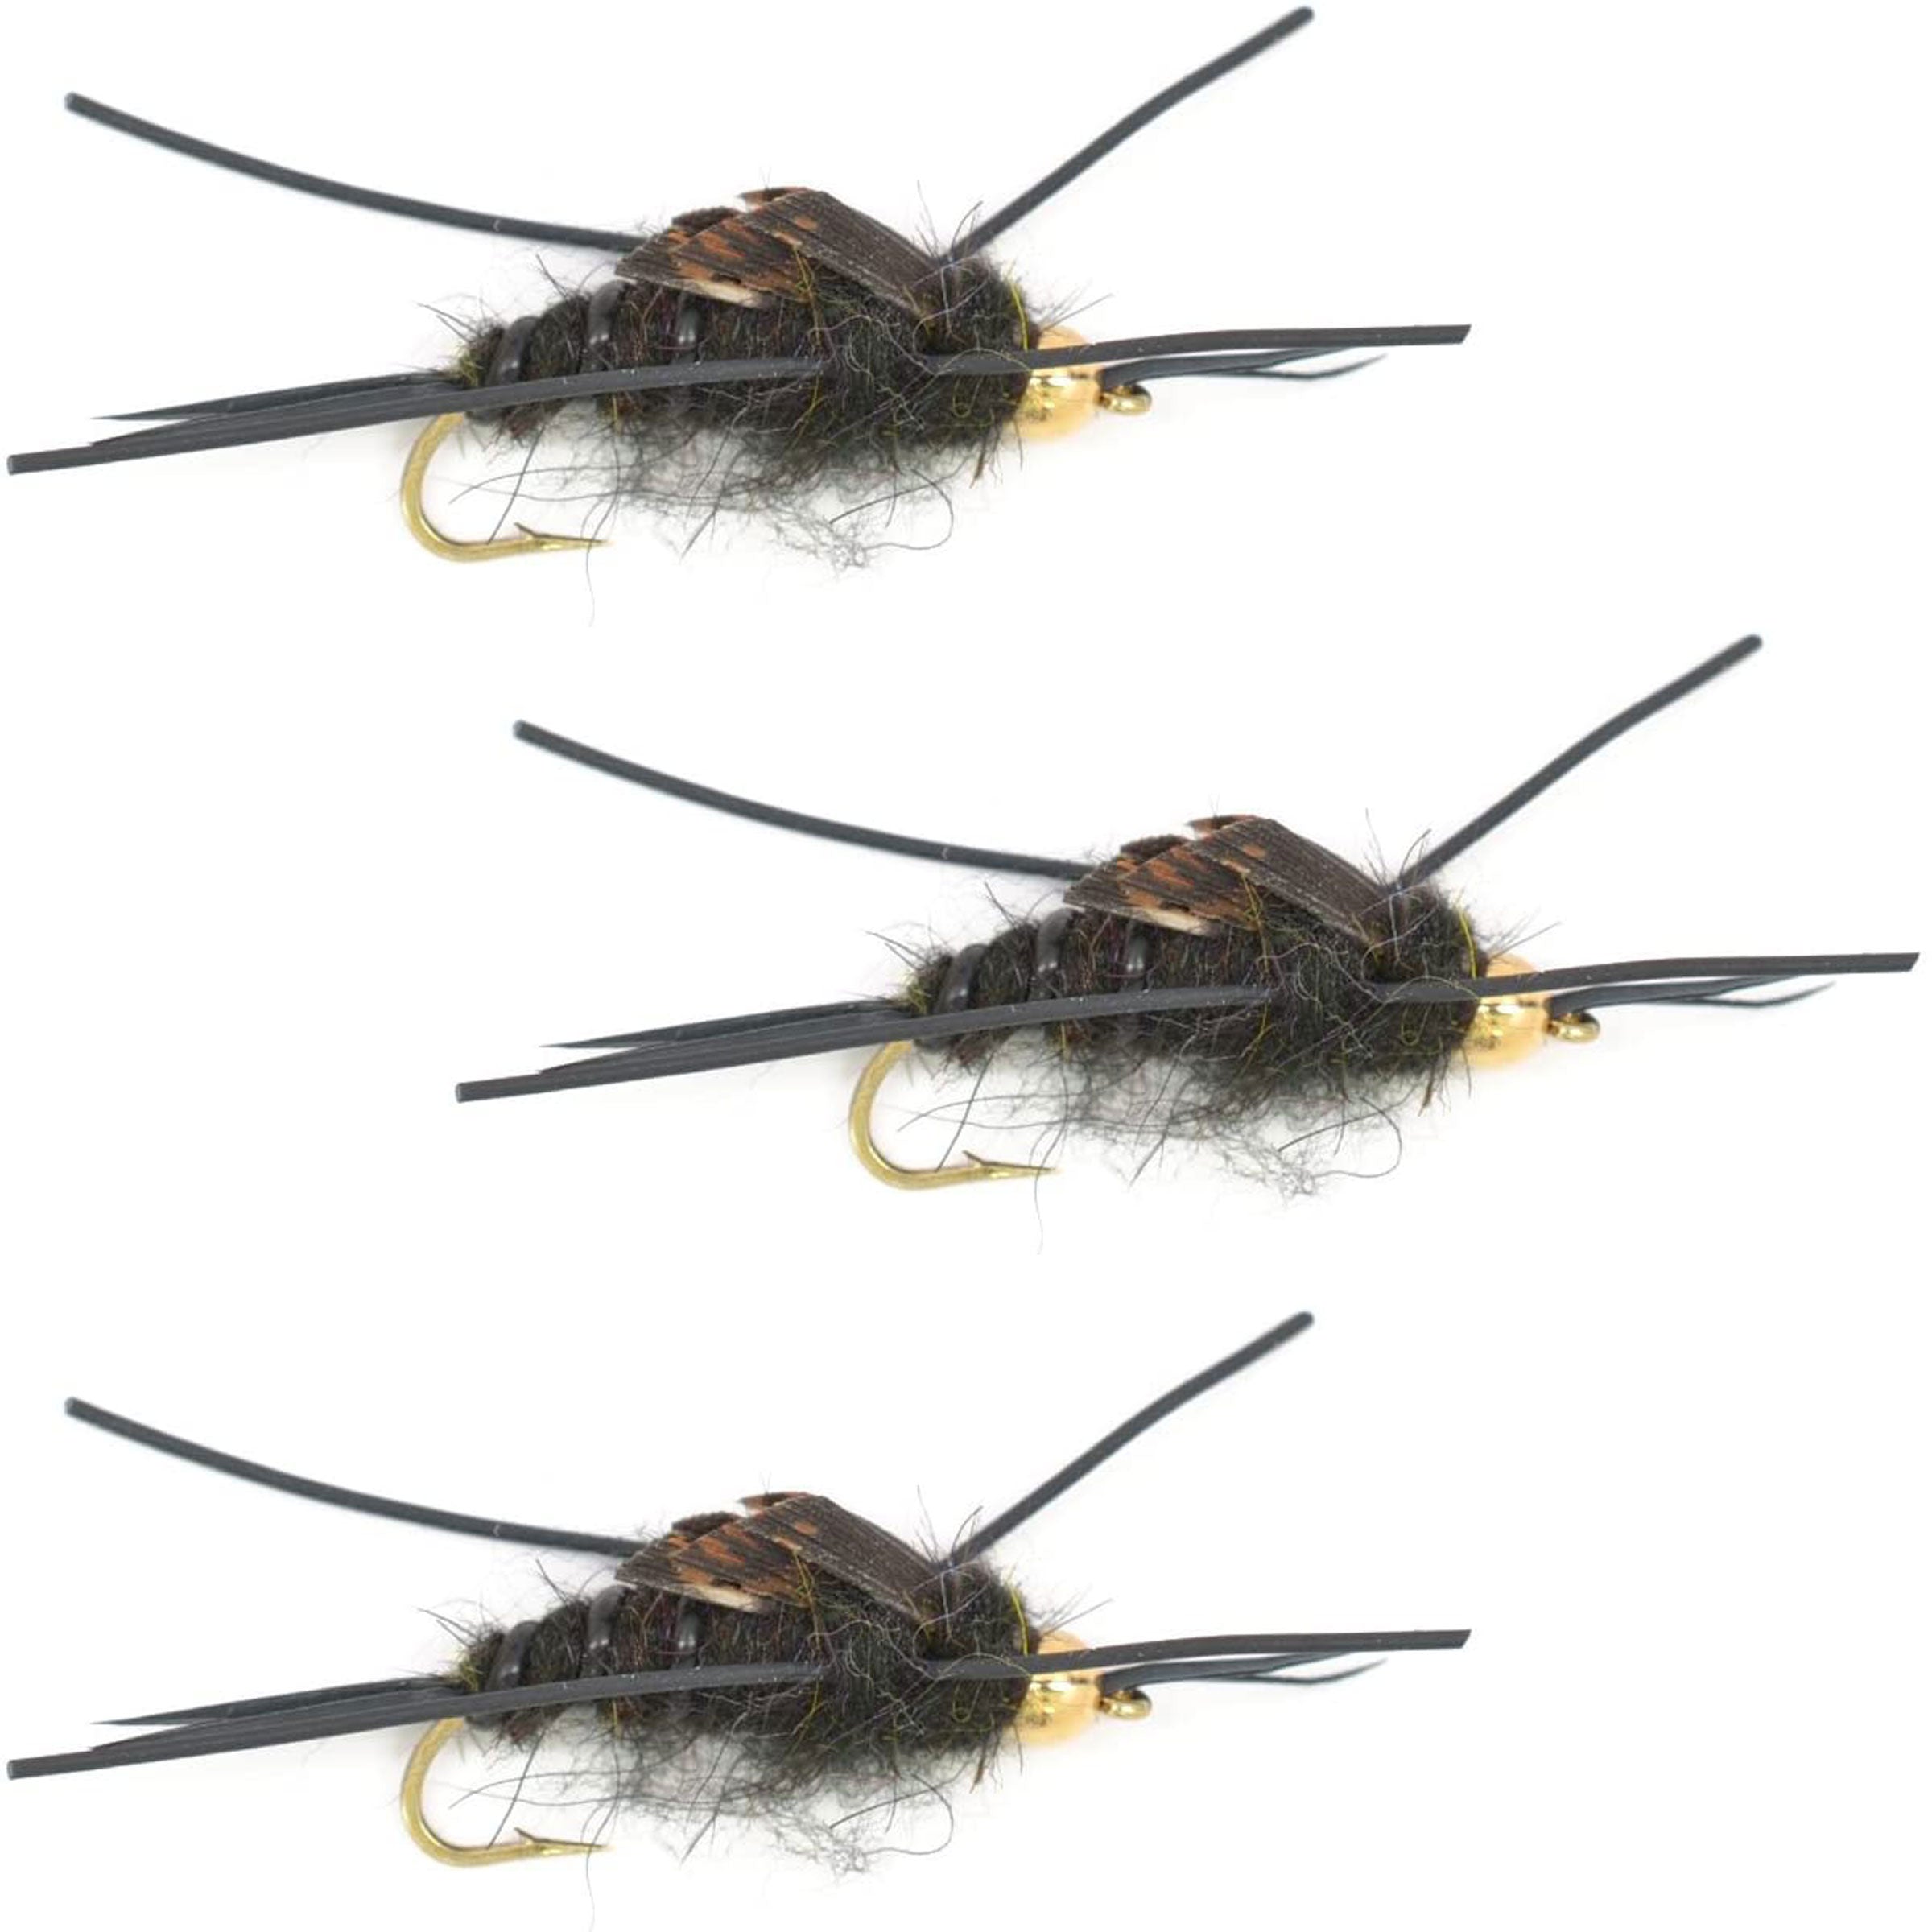 3 Pack Gold Bead Kaufmann's Black Stone Fly with Rubber Legs - Stonefly Wet Fly - Hook Size 12